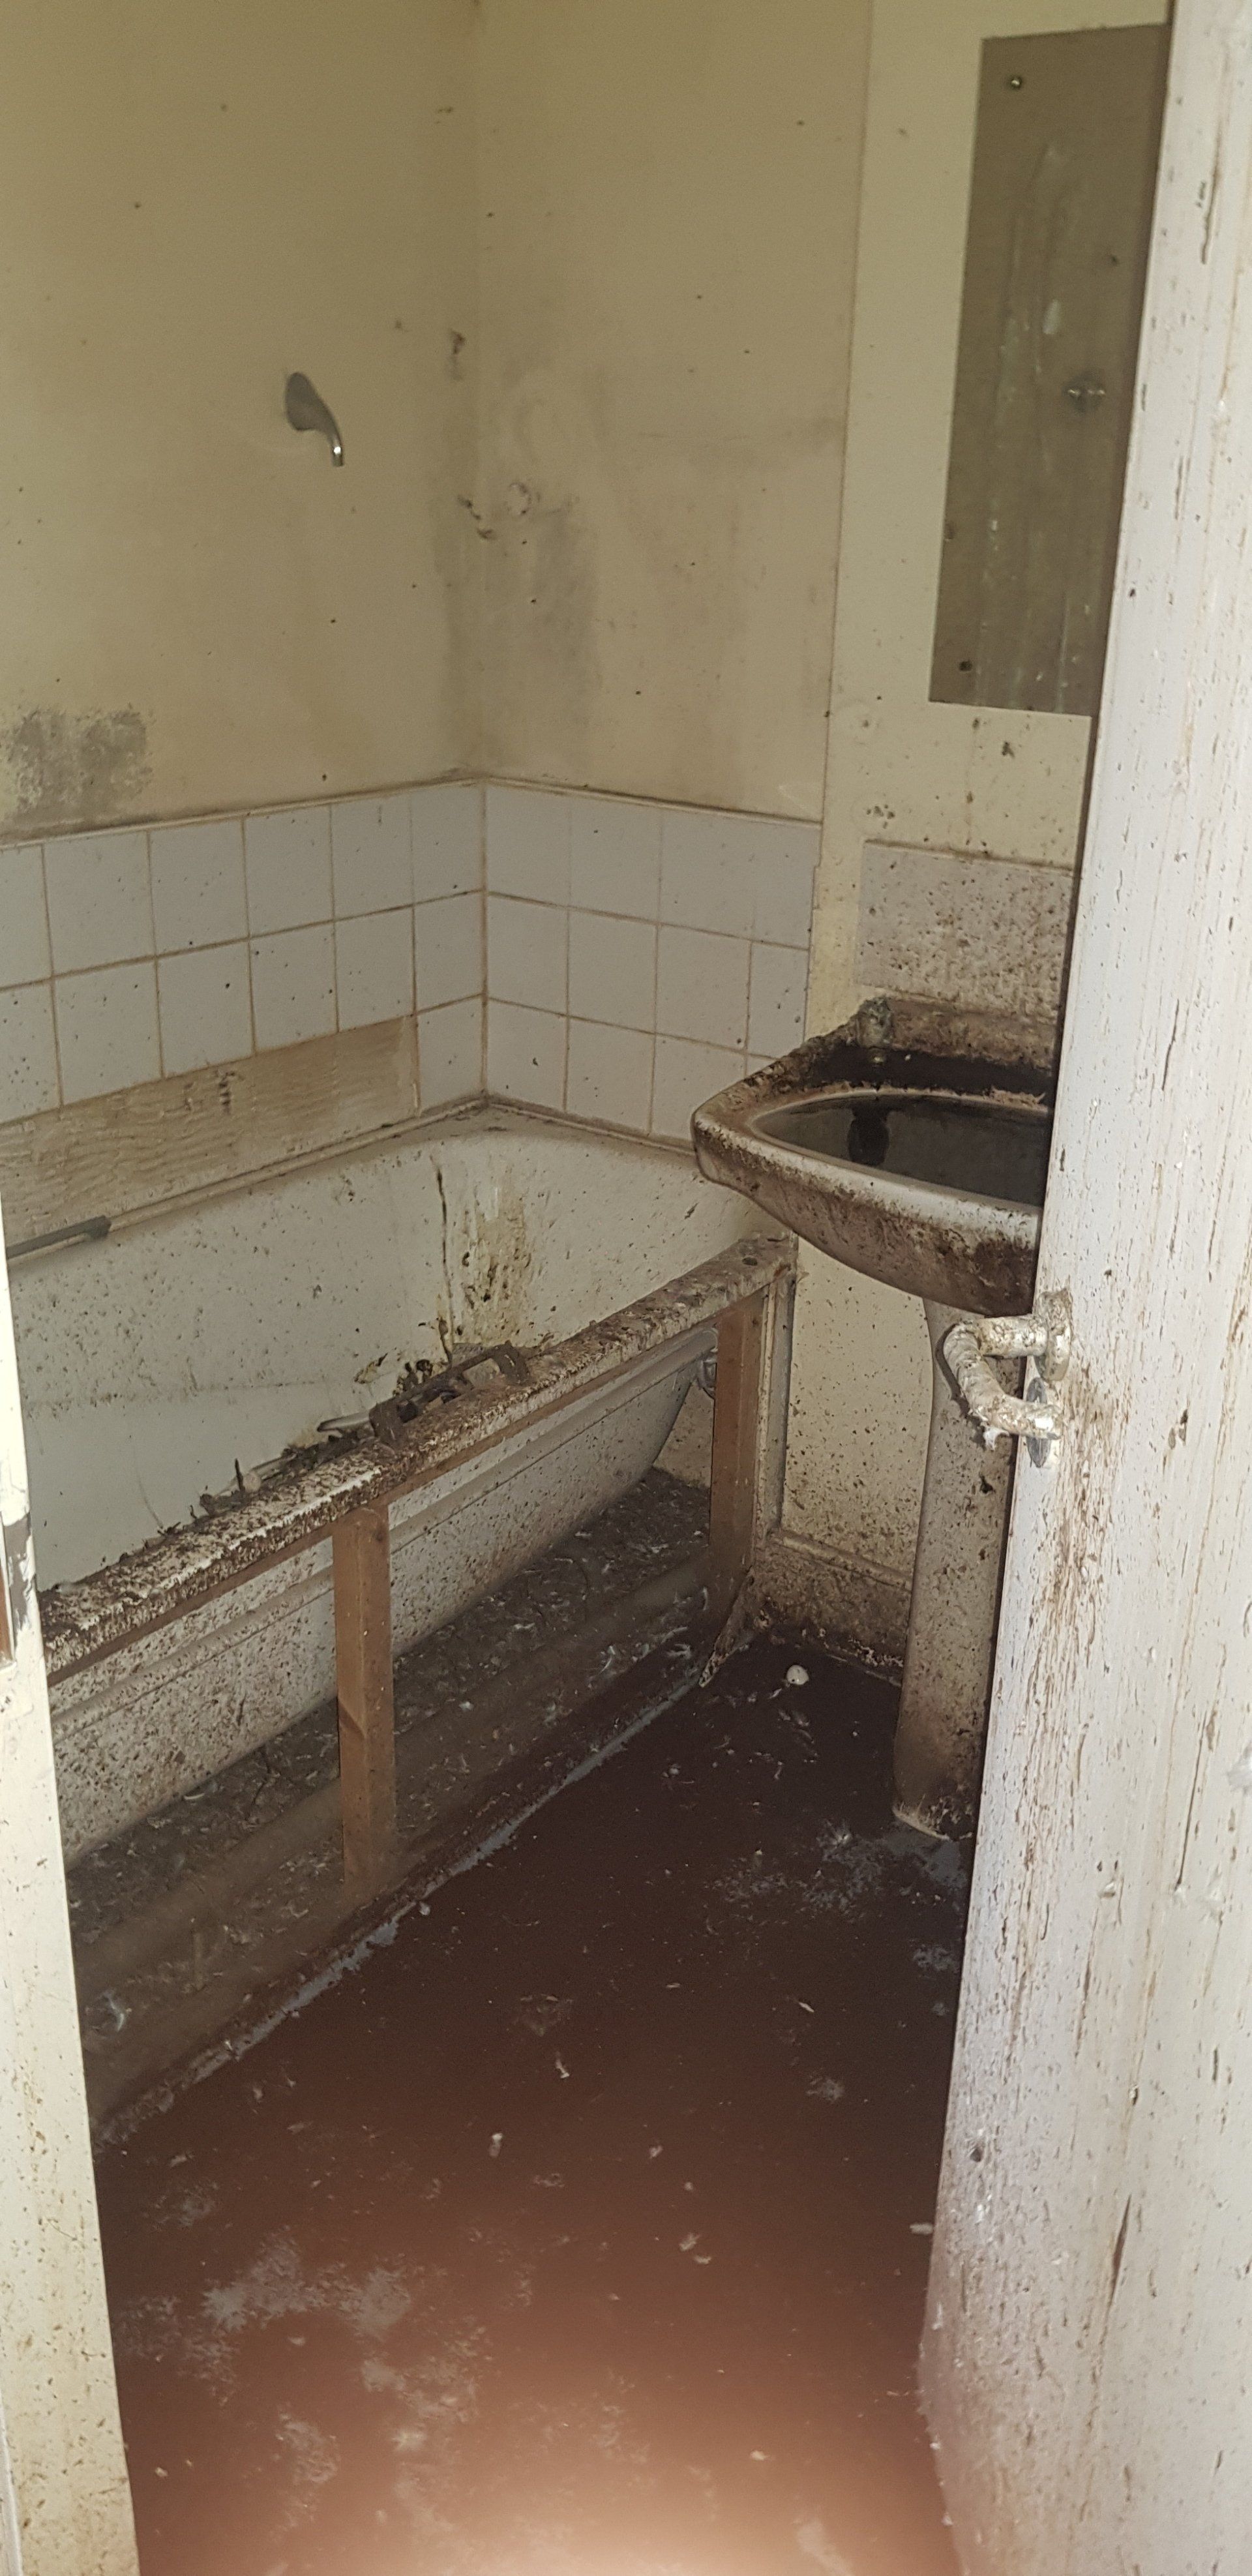 A bathroom completely filthy, with pigeon faeces all across the bath, floor, sink and door.